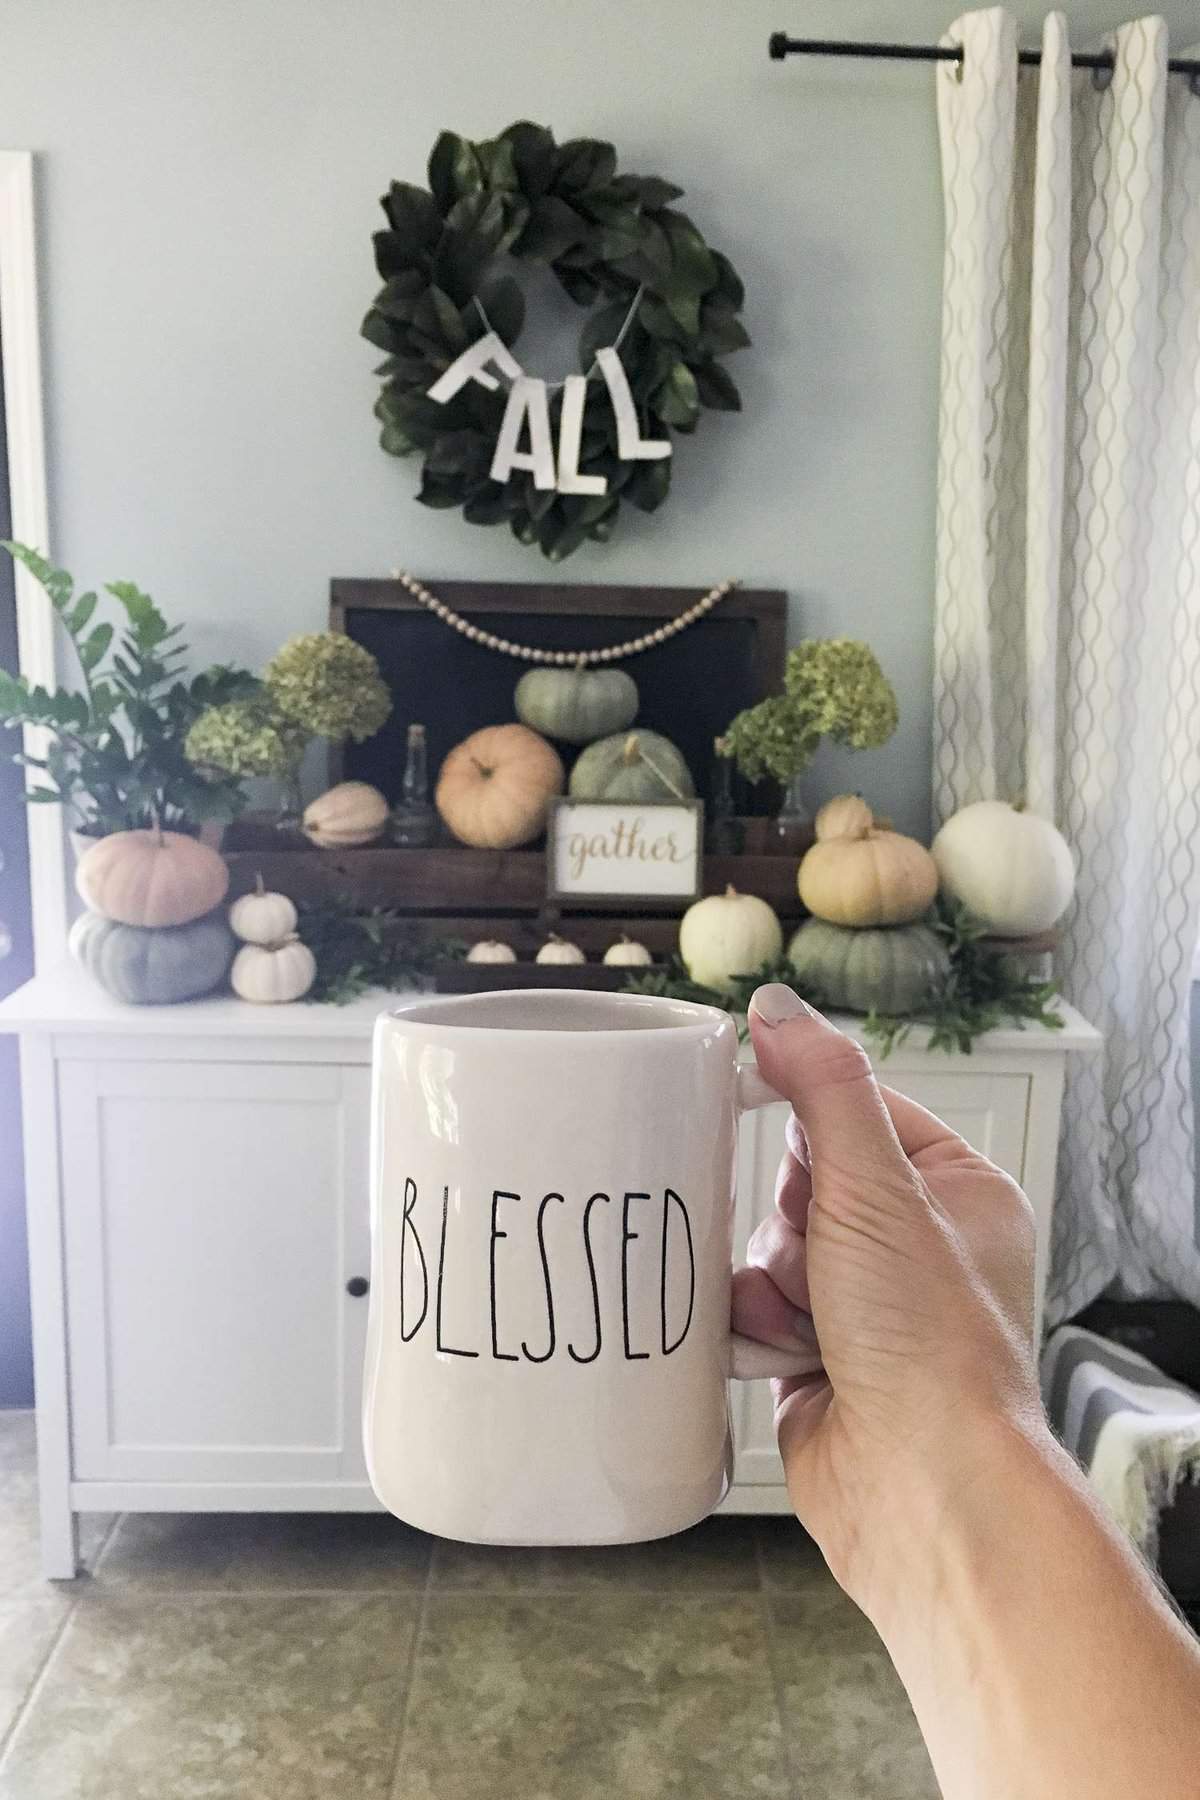 Looking for fall home decor ideas? I'm excited to share a simple fall decor home tour along with 7 other talented home decor bloggers with you today.